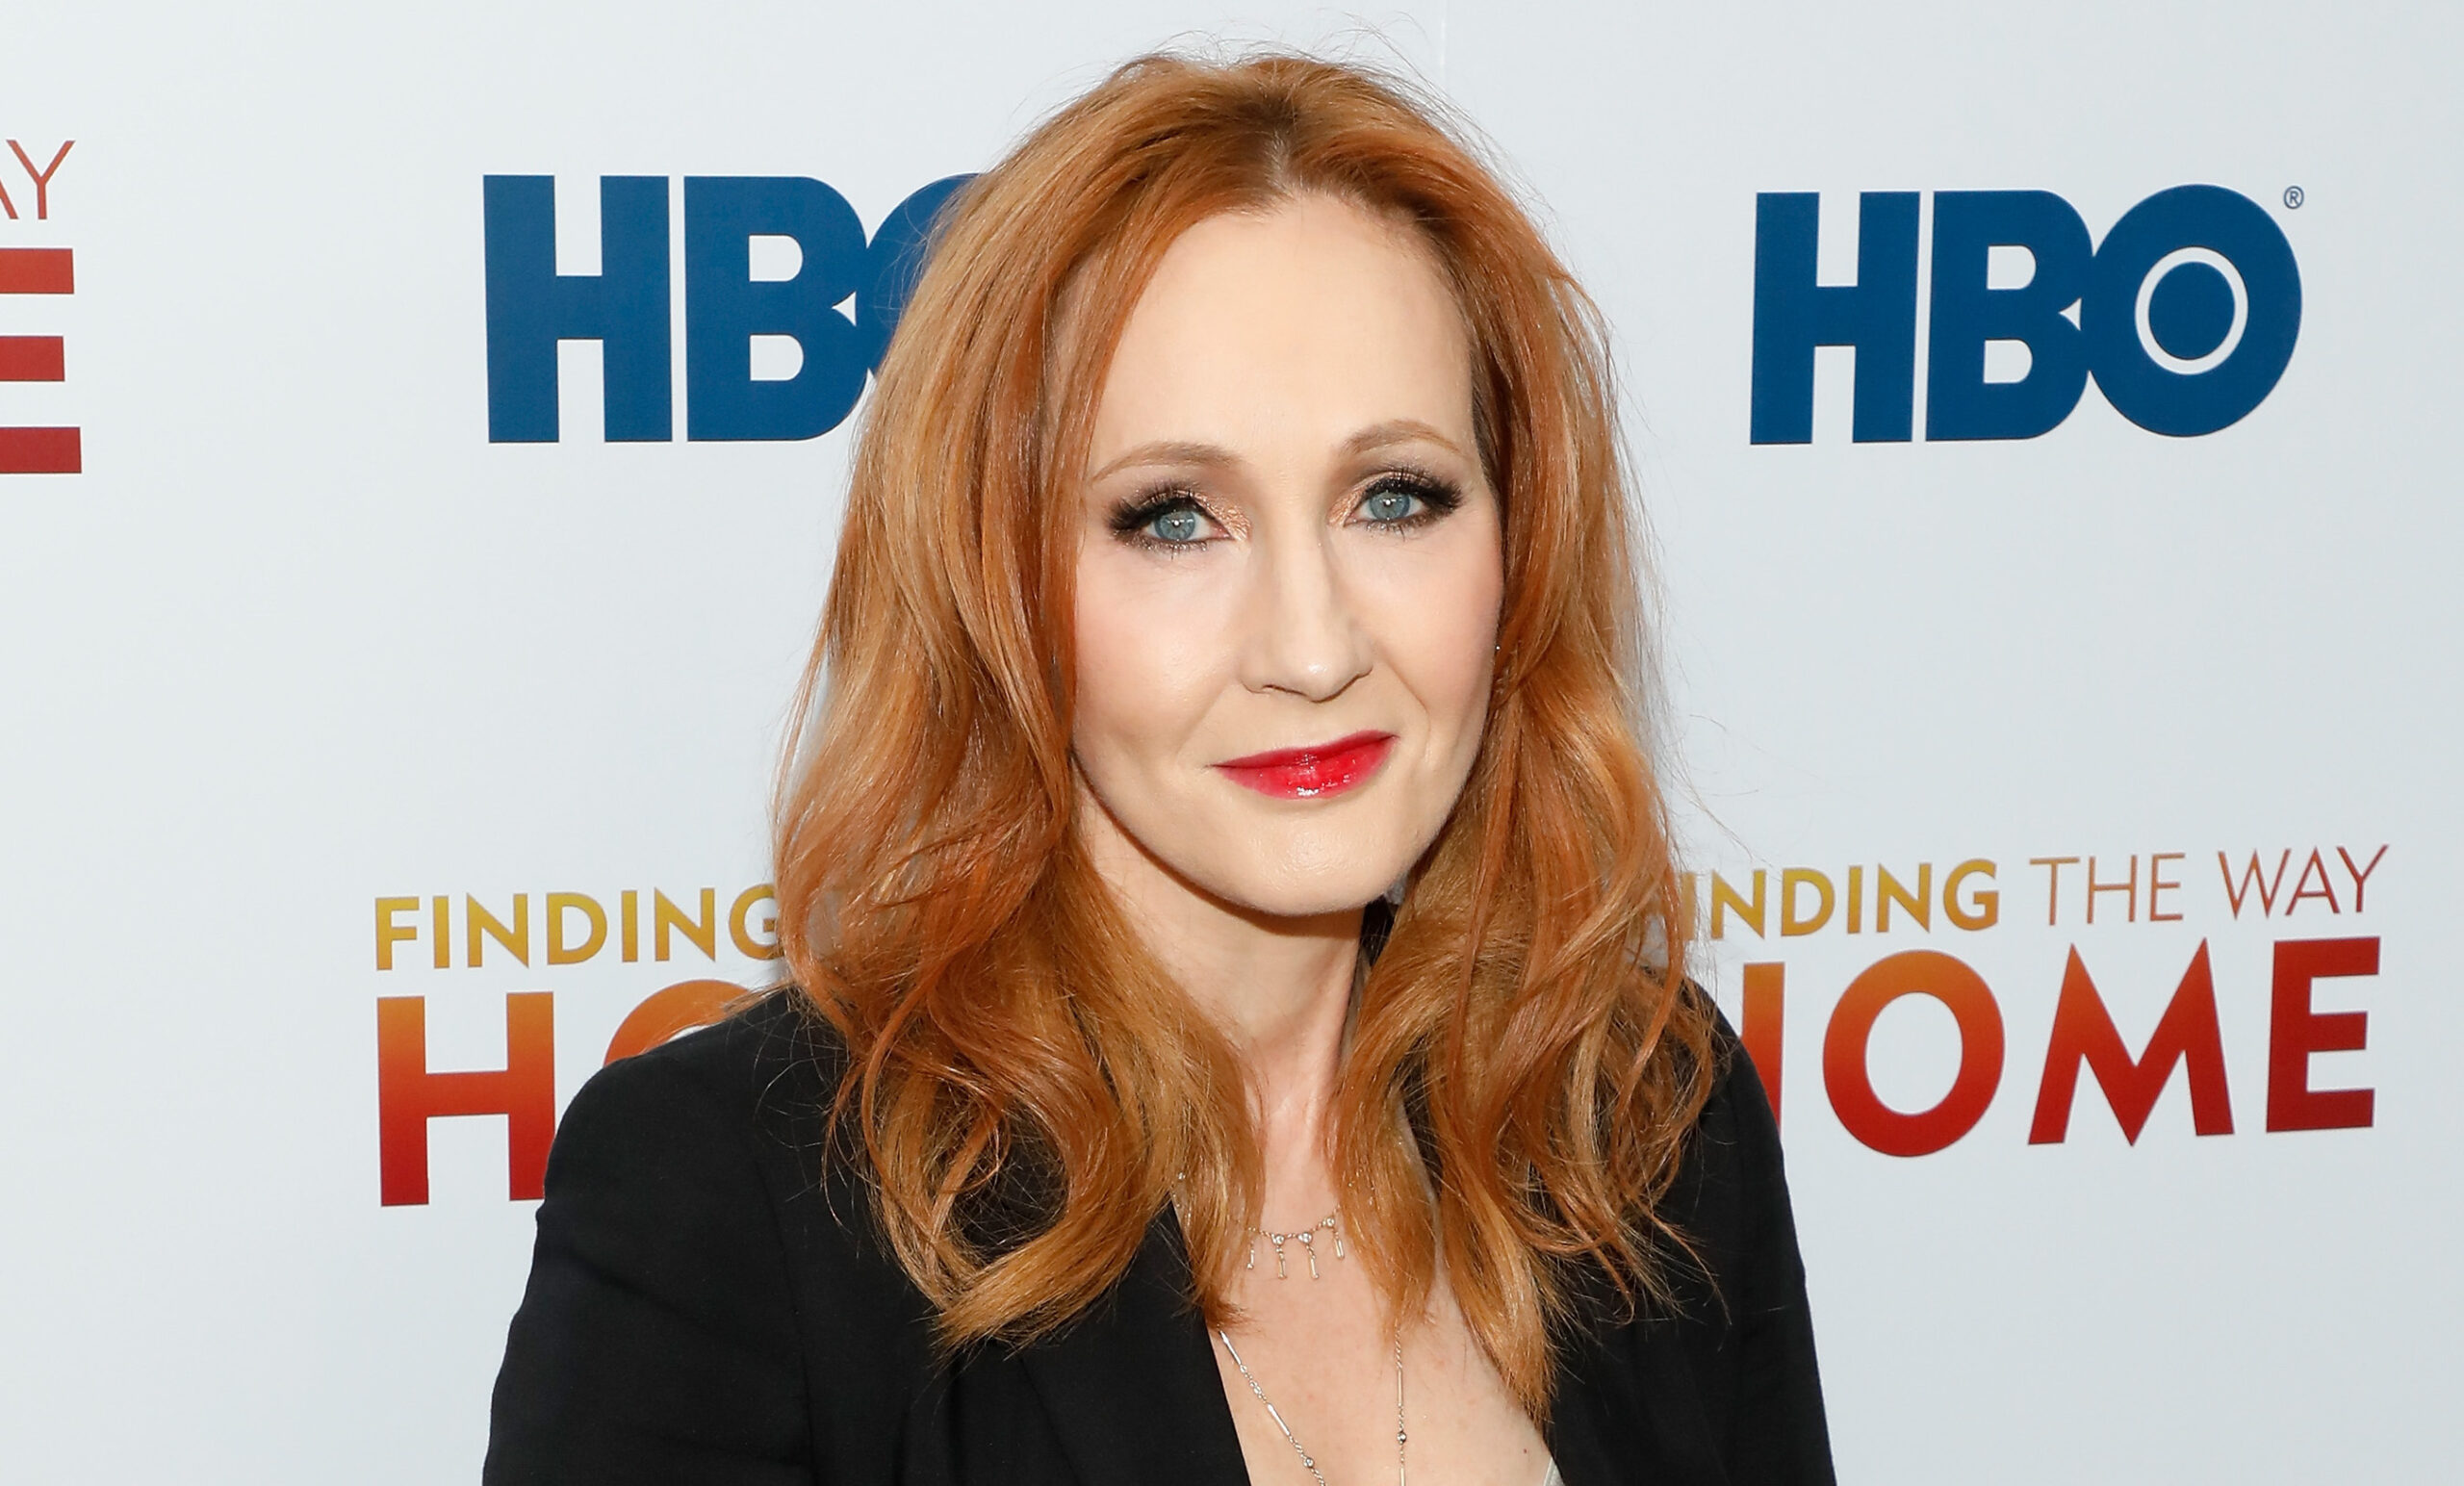 J.K. Rowling criticizes claim that trans people pose no threat in women’s restrooms.